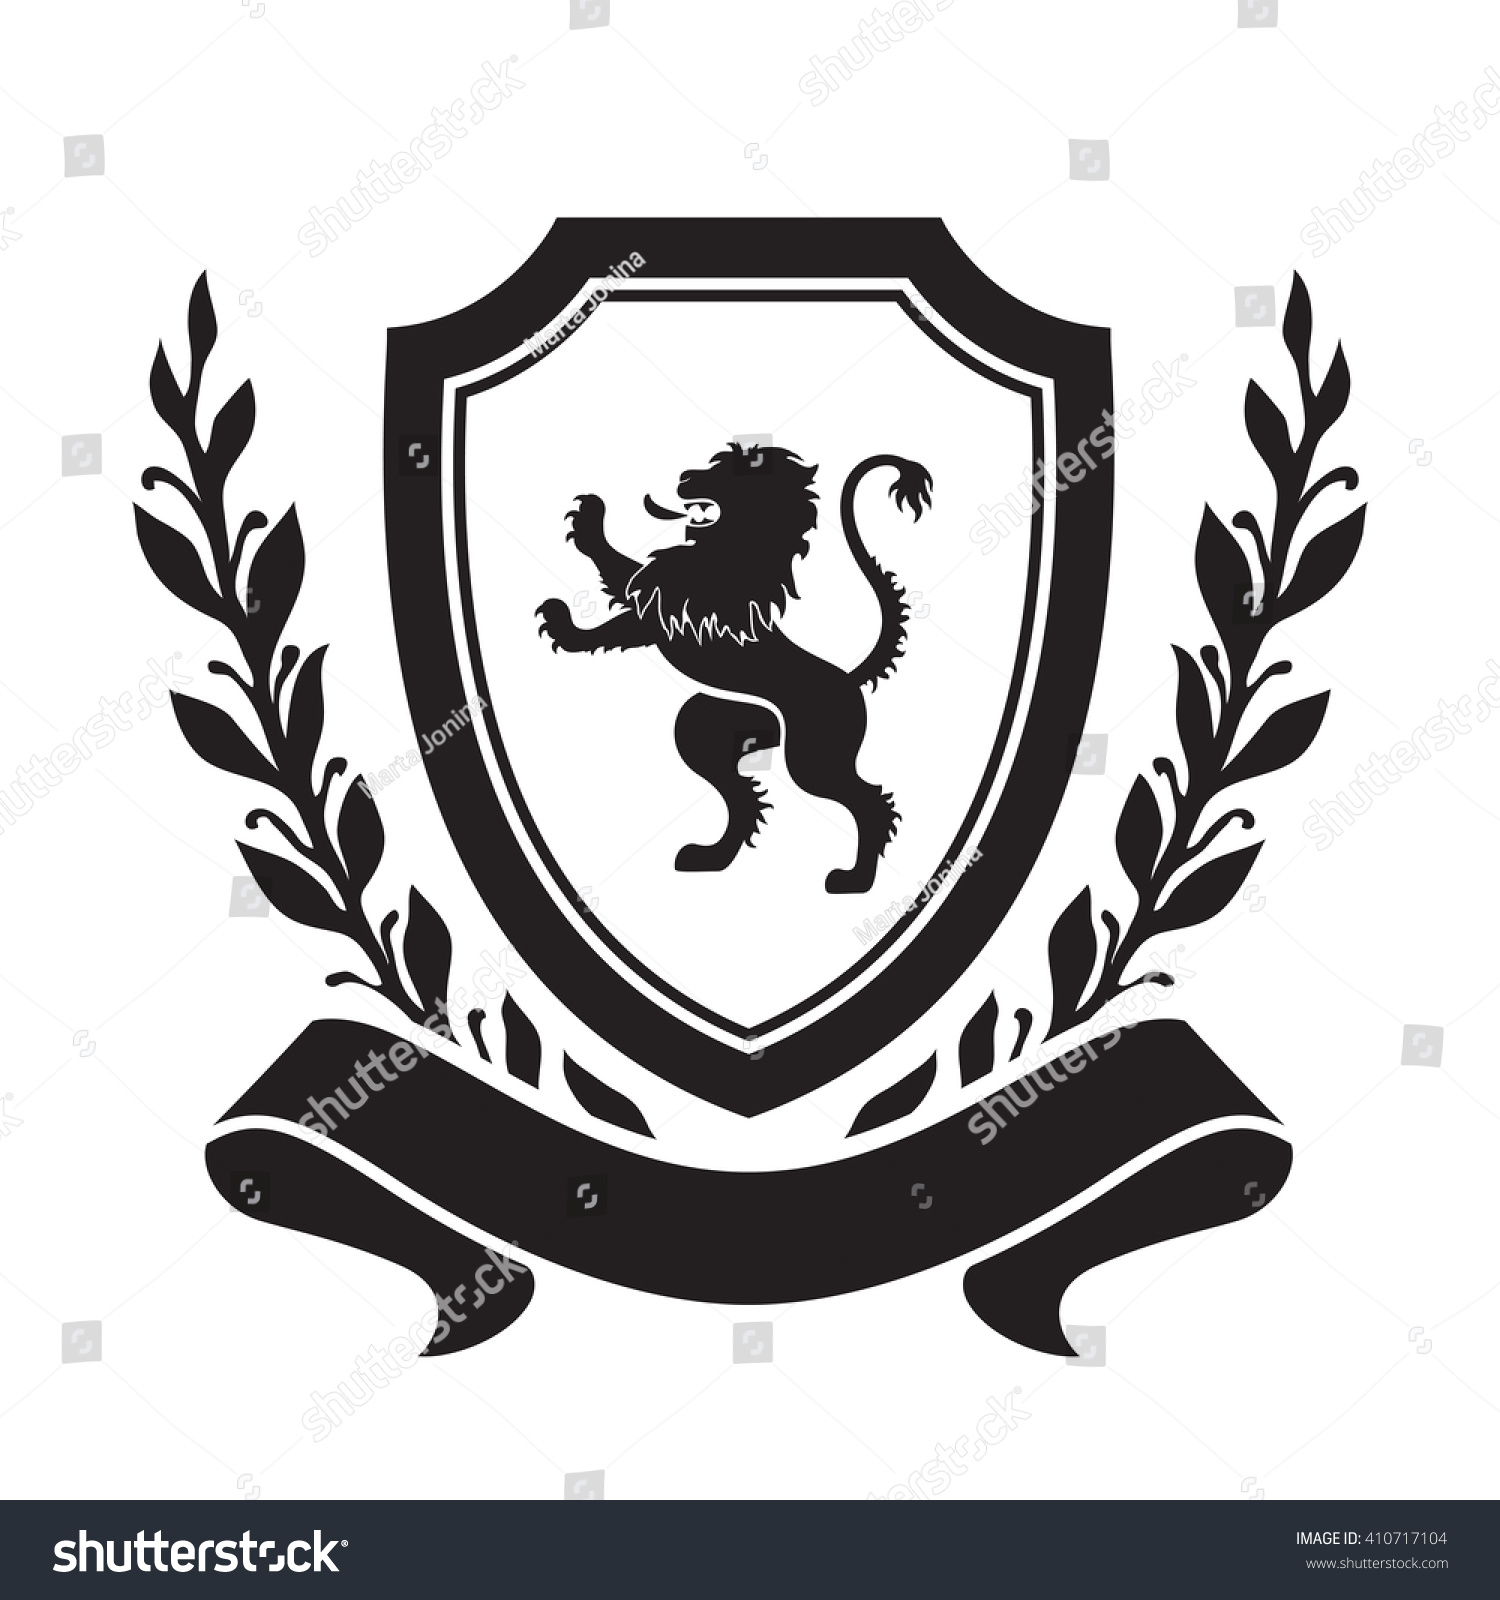 ribbon banners SVG. Steele Family crest crown and swan Coat of arms svg Heraldic shield with lion